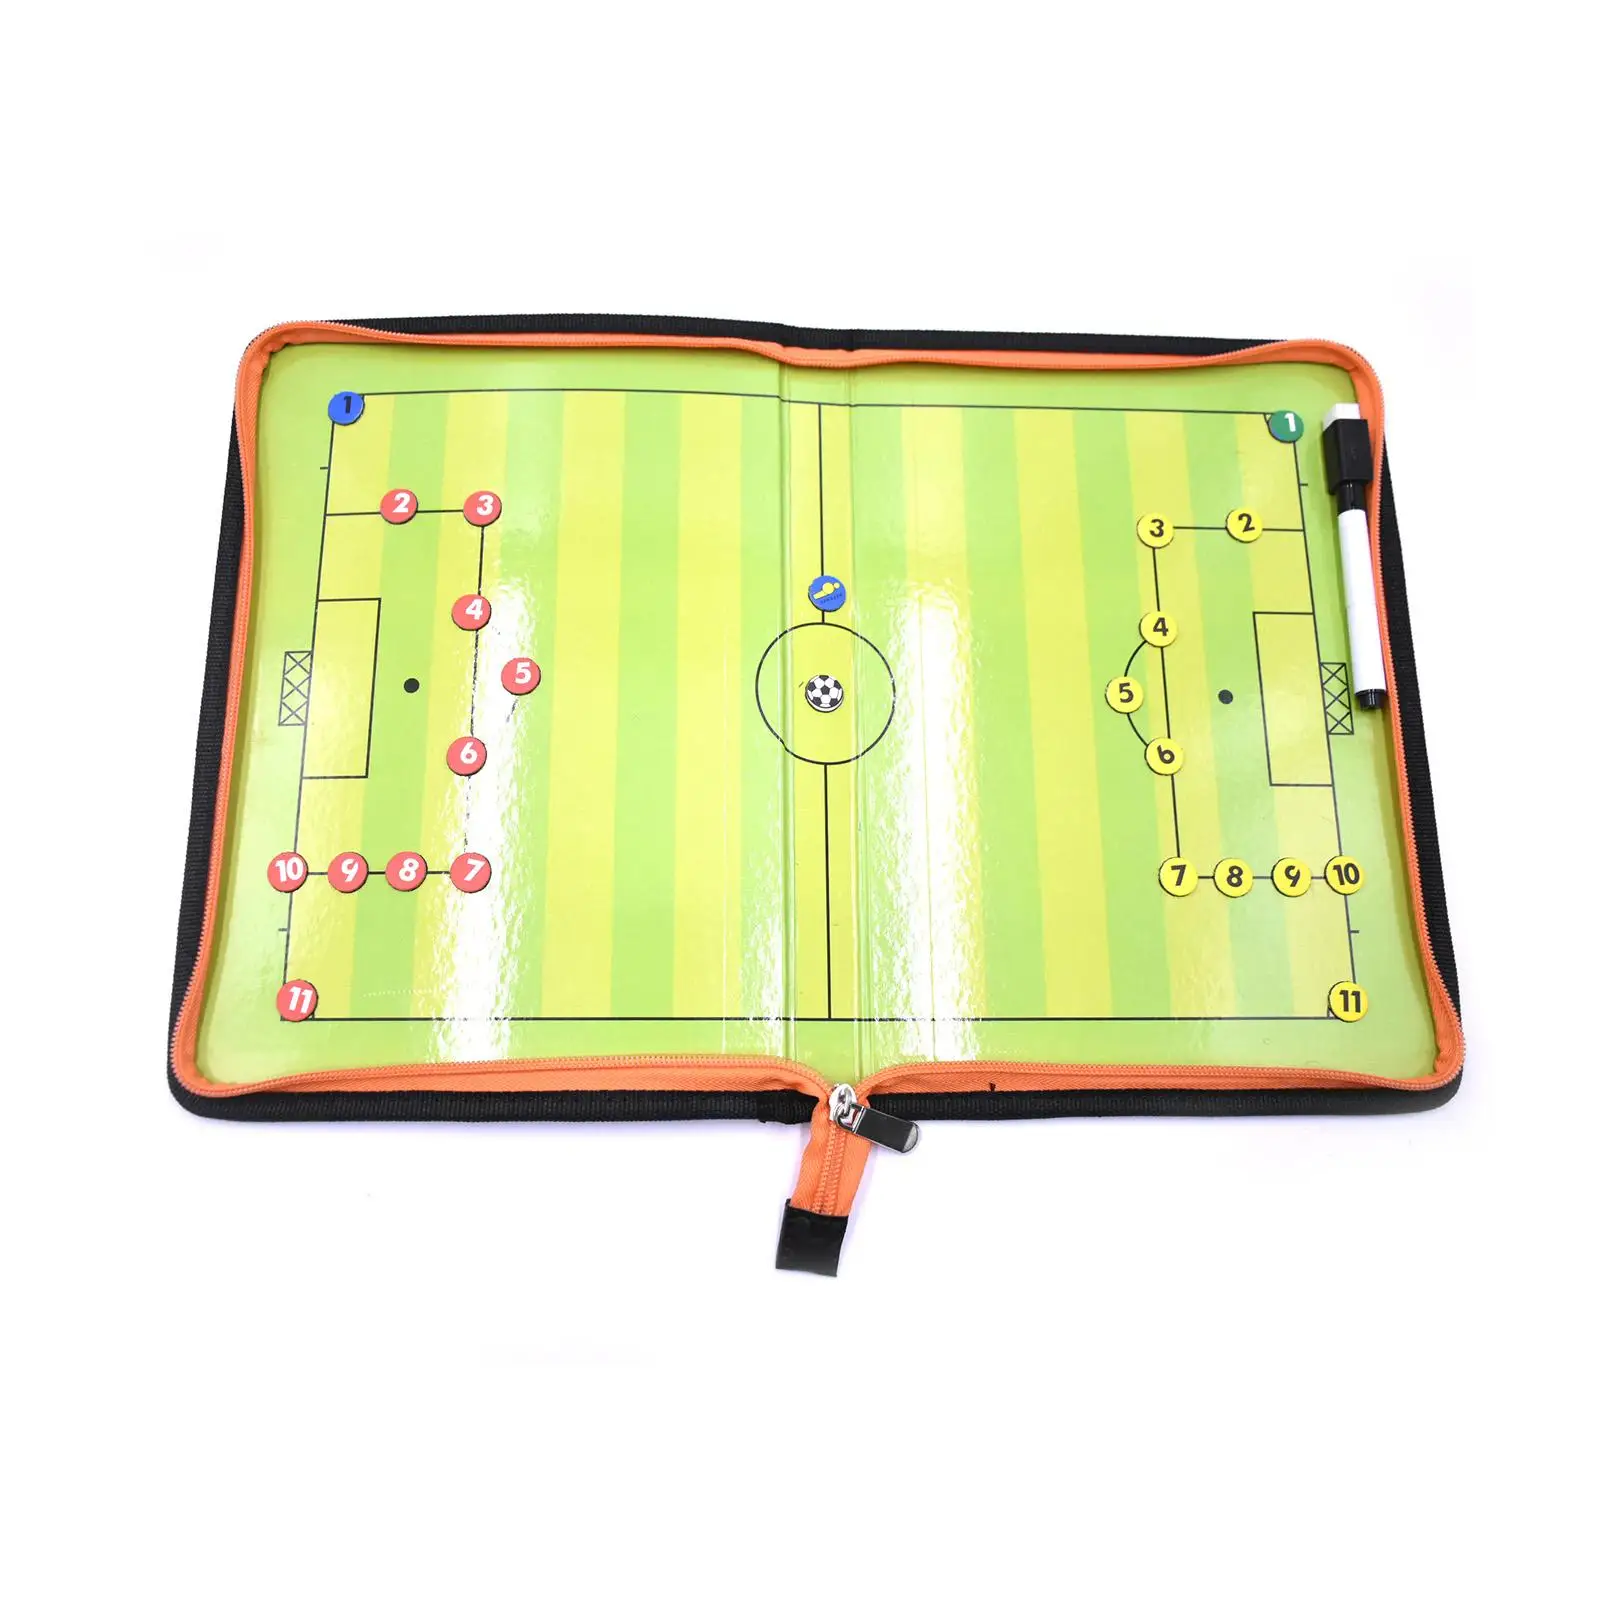 

Football Coaching Board Practice Teaching Assistant Football Coaches Clipboard Guidance Training Folded with Erasable Marker